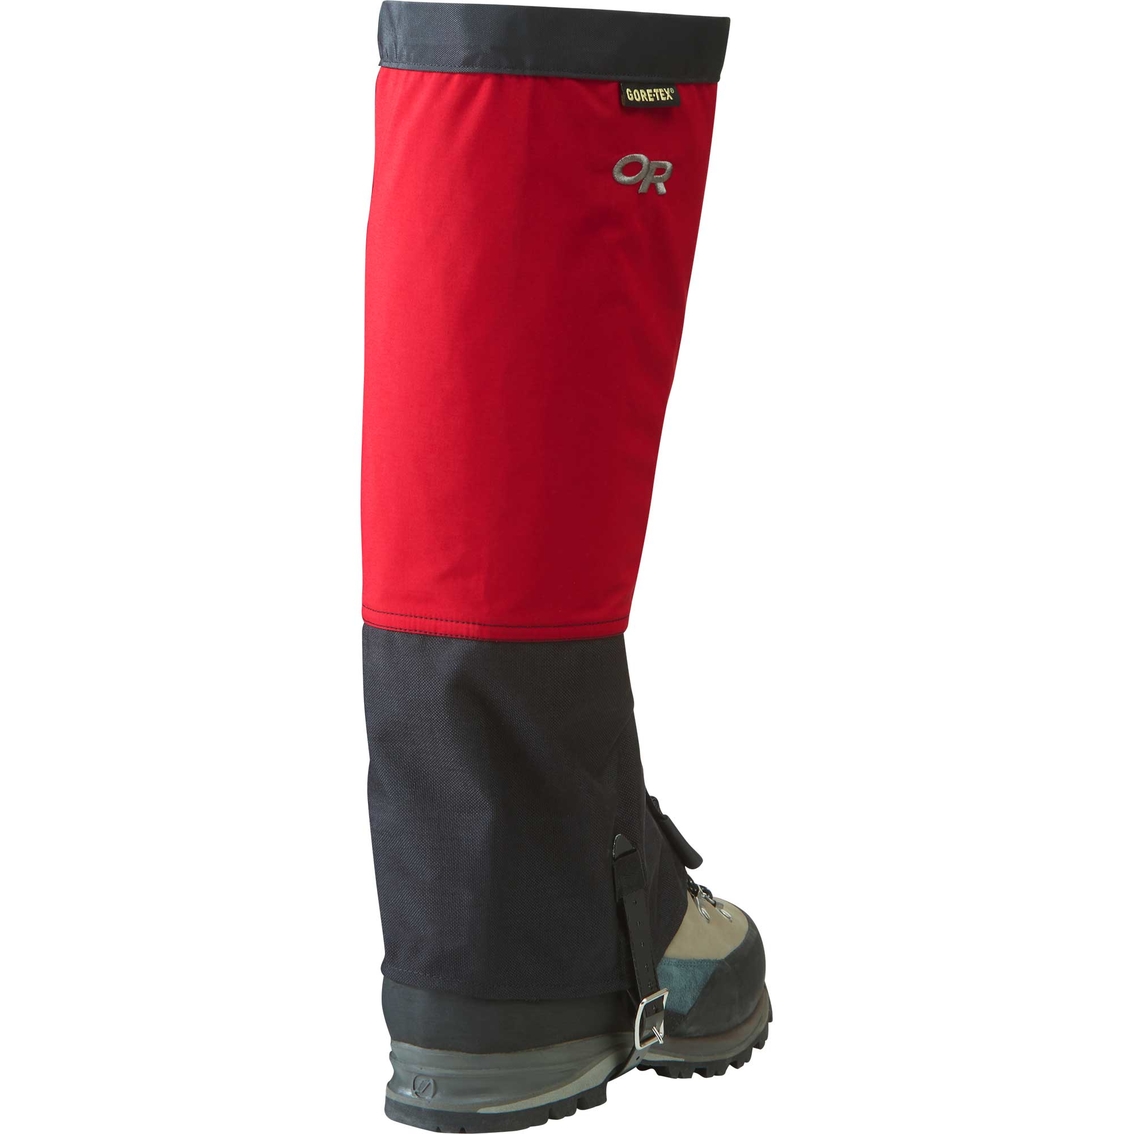 Outdoor Research Crocodile Gaiters - Image 2 of 2